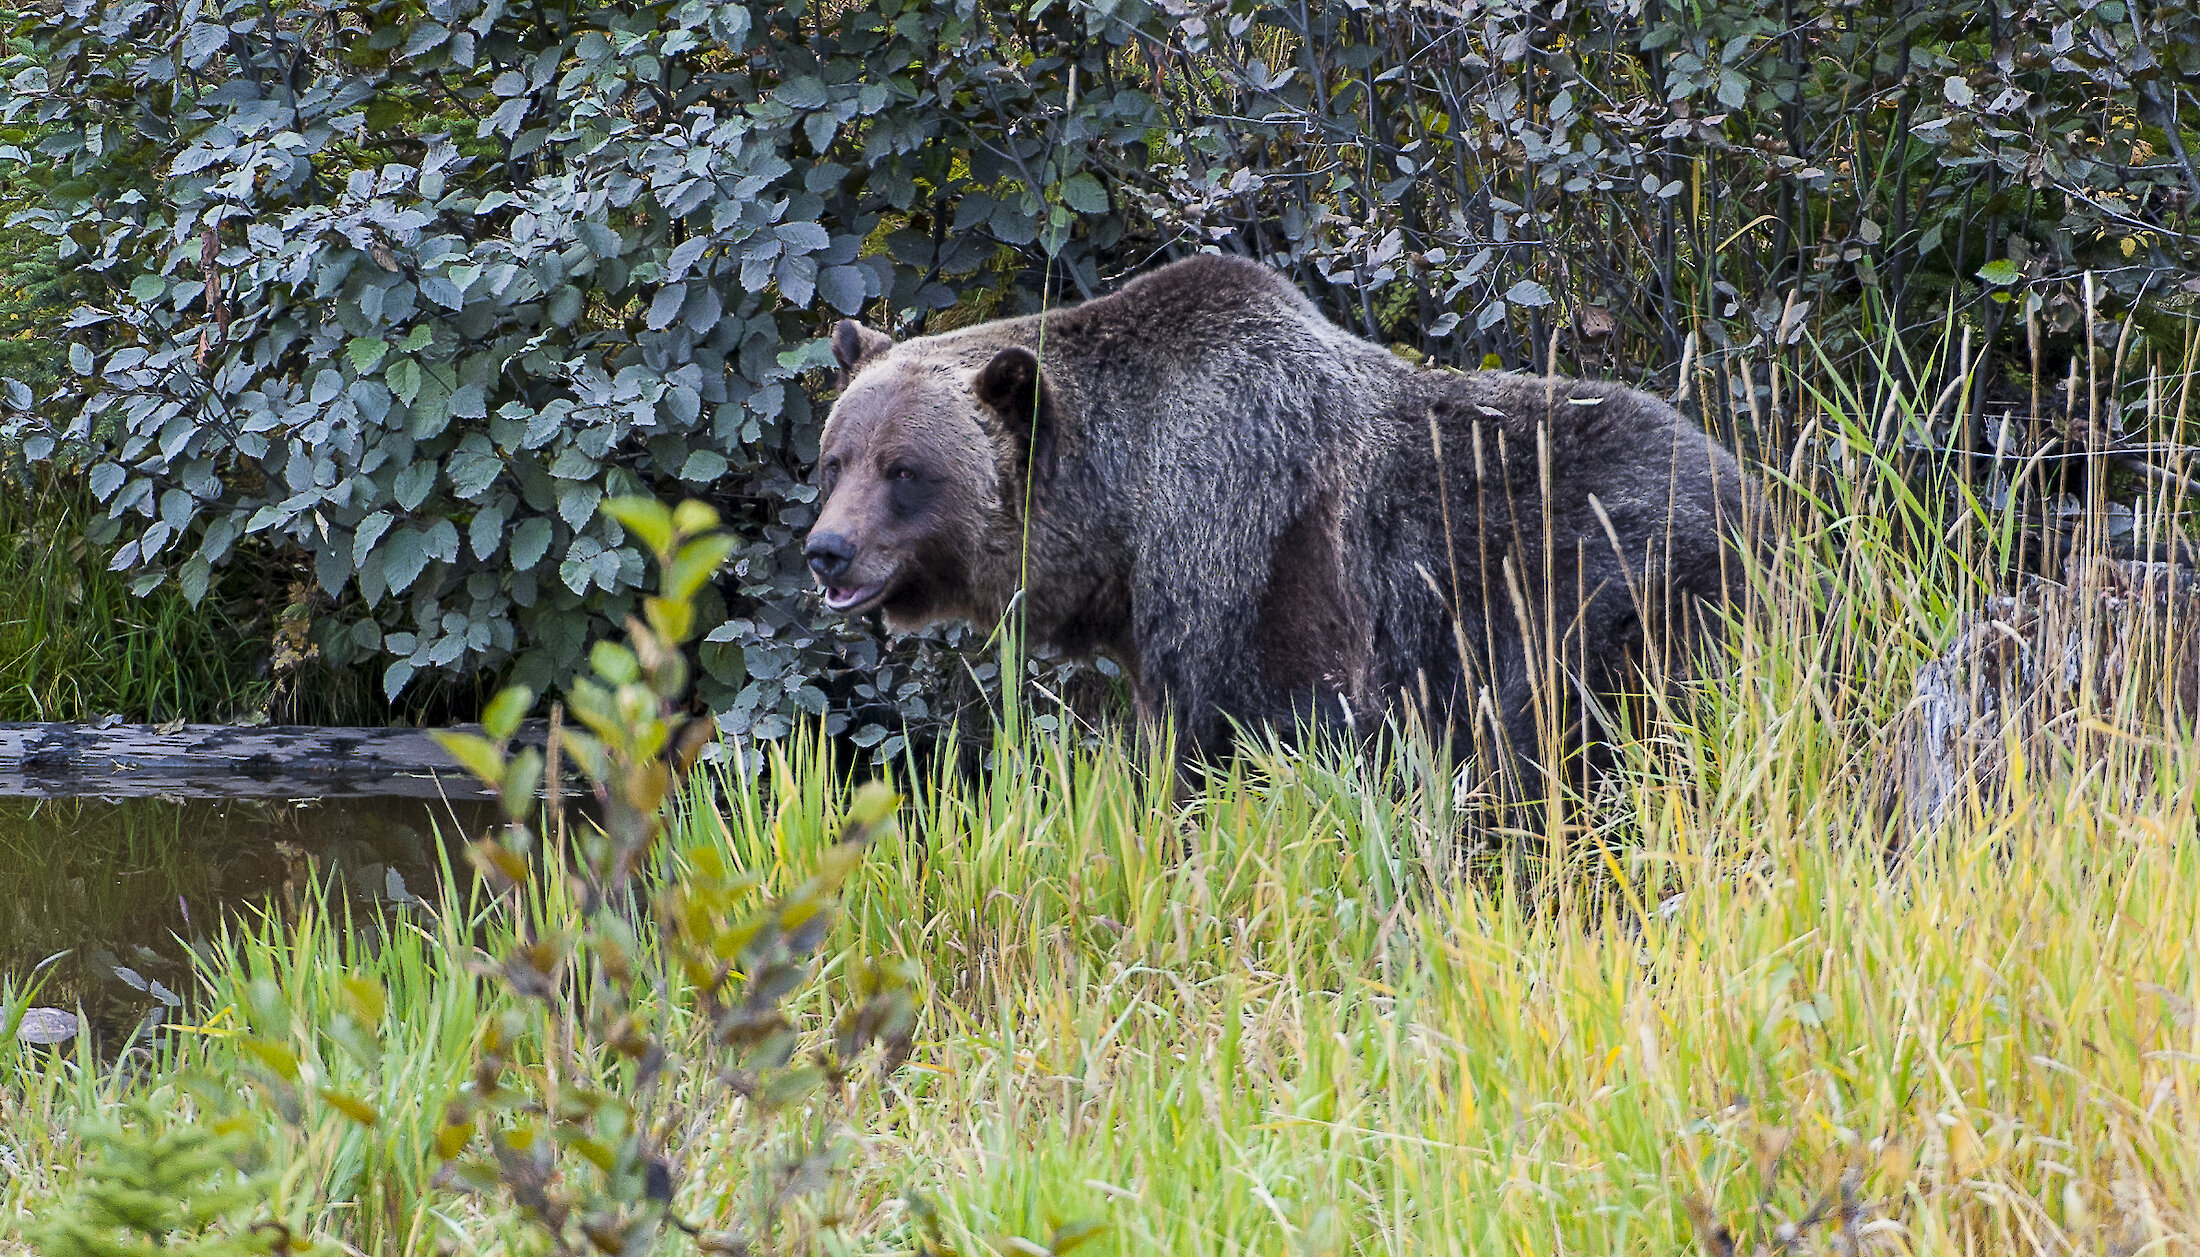 Boo the Grizzly Bear in his refuge at Kicking Horse Mountain Resort